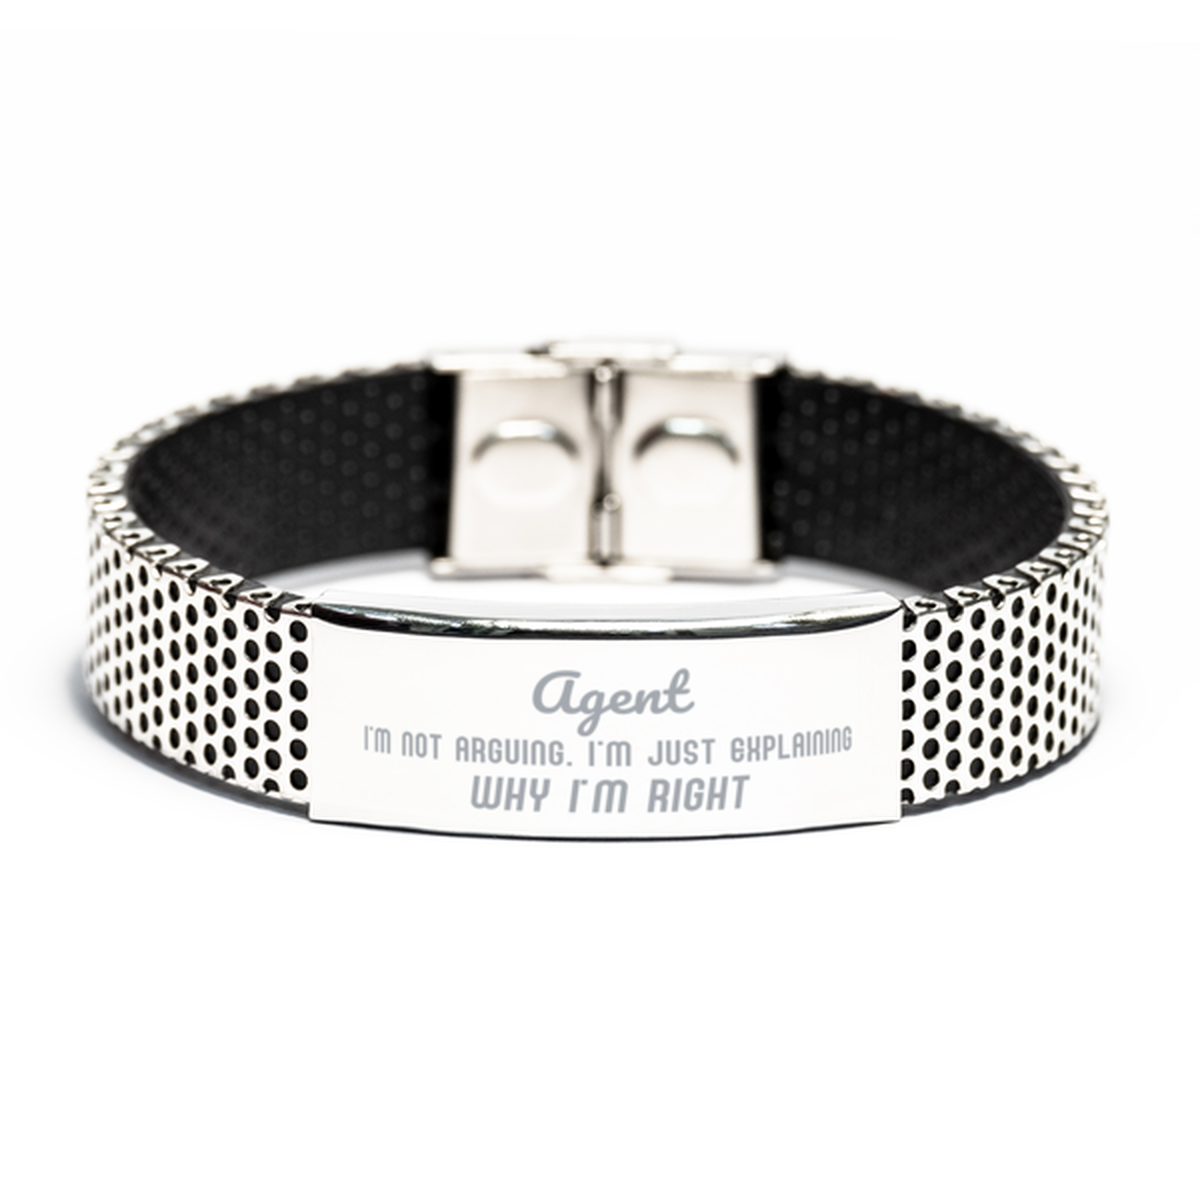 Agent I'm not Arguing. I'm Just Explaining Why I'm RIGHT Stainless Steel Bracelet, Funny Saying Quote Agent Gifts For Agent Graduation Birthday Christmas Gifts for Men Women Coworker